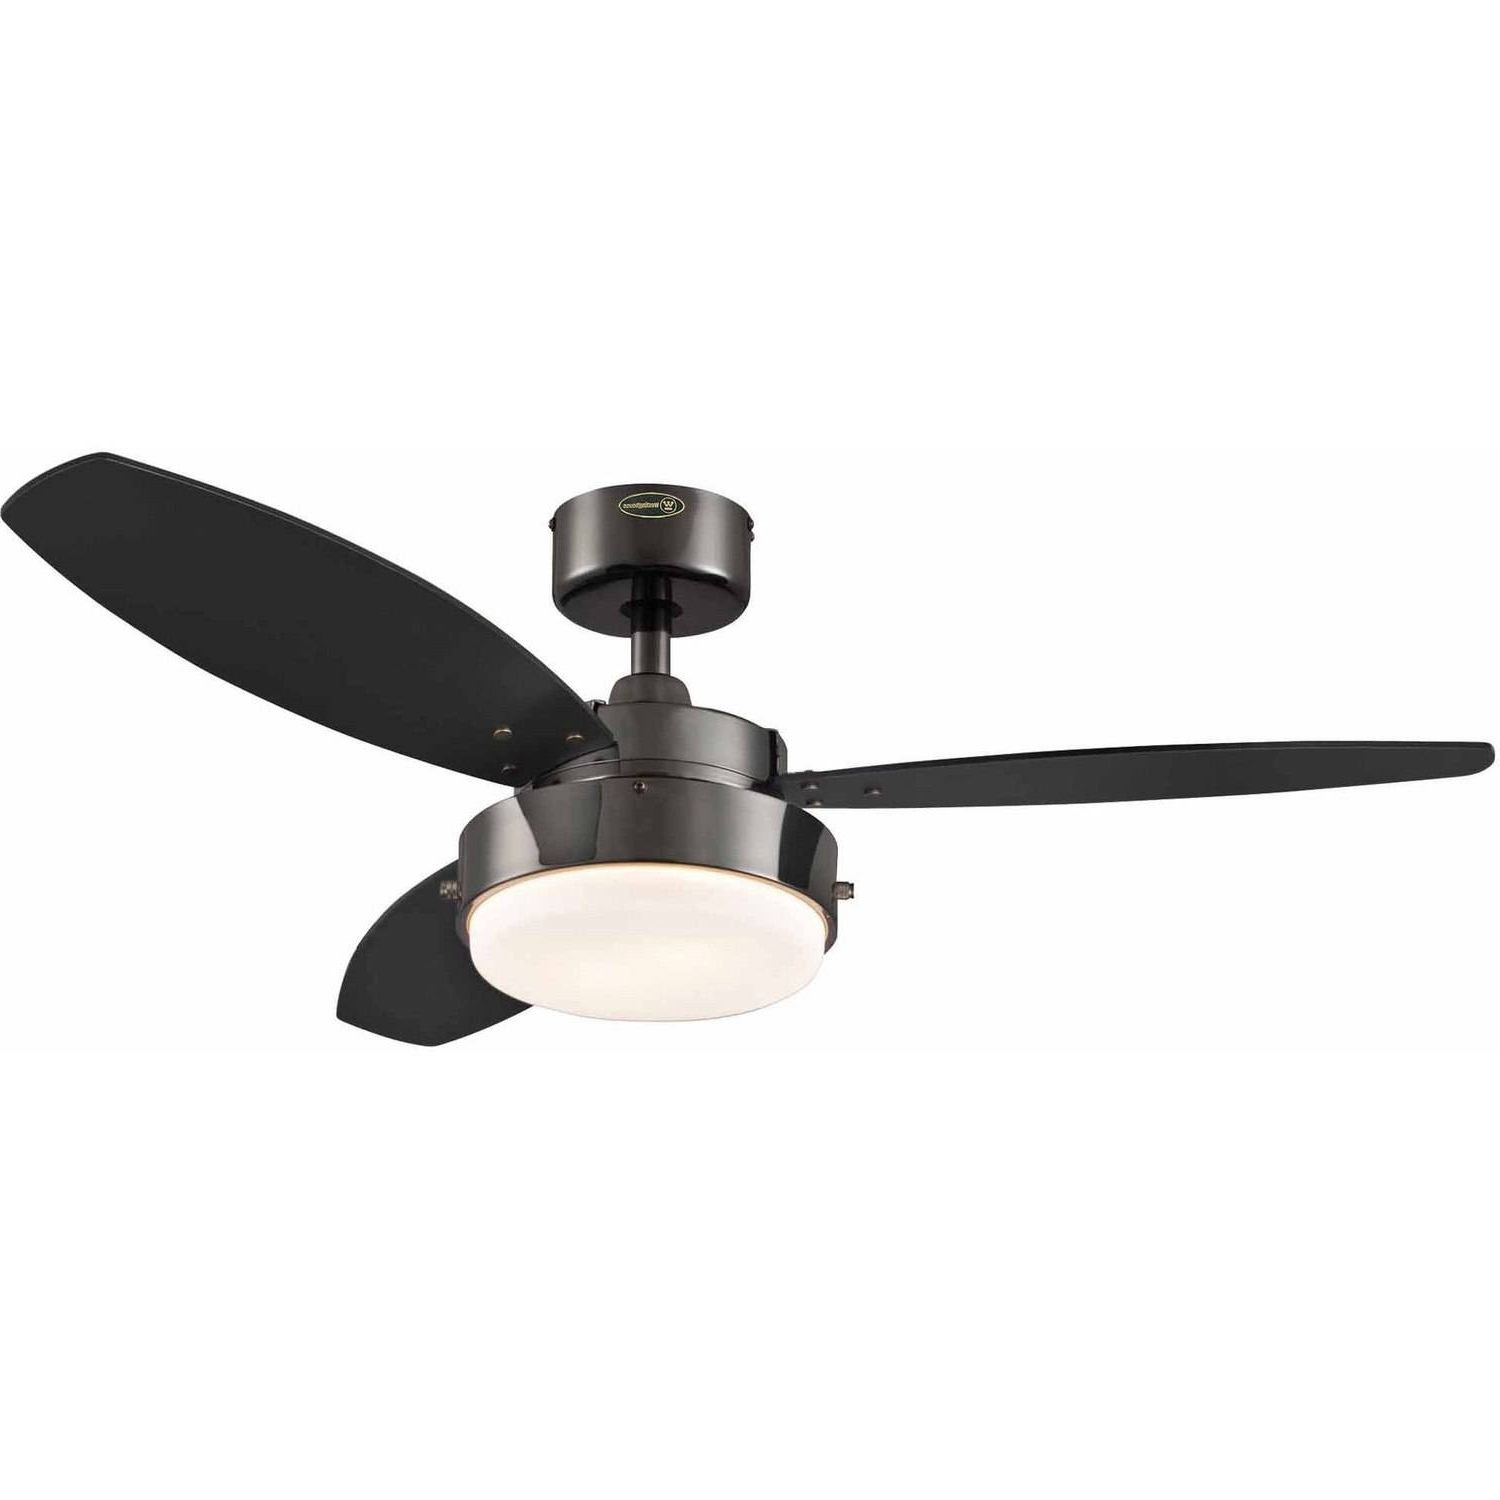 Trendy Westinghouse 7876400 42" Gun Metal 3 Blade Reversible Ceiling Fan Intended For Metal Outdoor Ceiling Fans With Light (View 5 of 20)